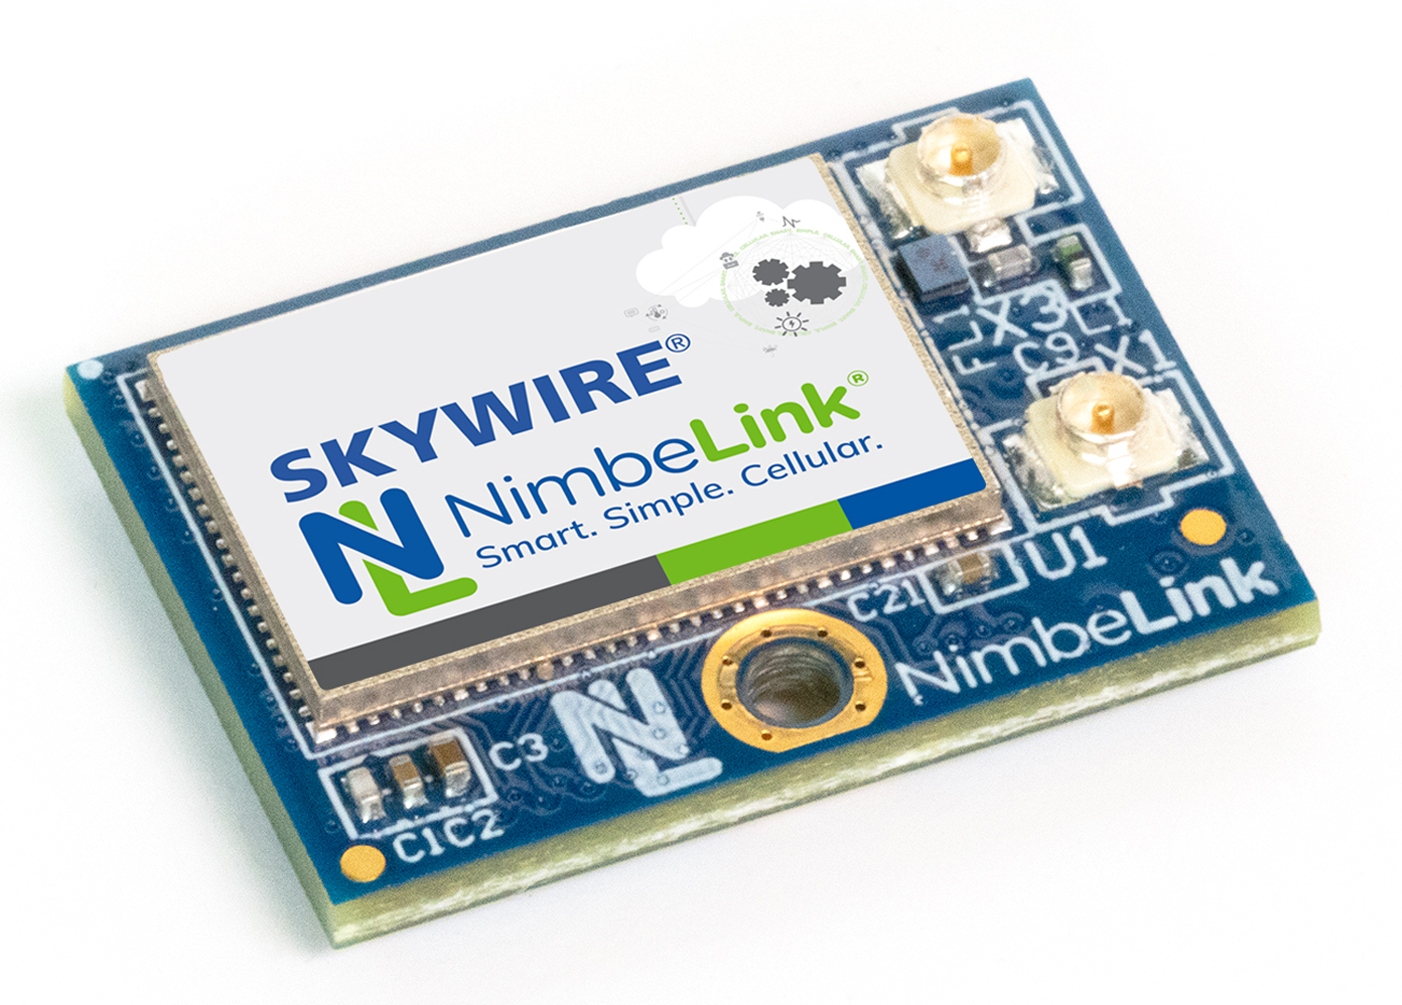 NL-SWN-LTE-NRF9160 - Skywire Nano Cellular Modem, LTE Cat M1/NB IoT - Global - Nano Form Factor with processor